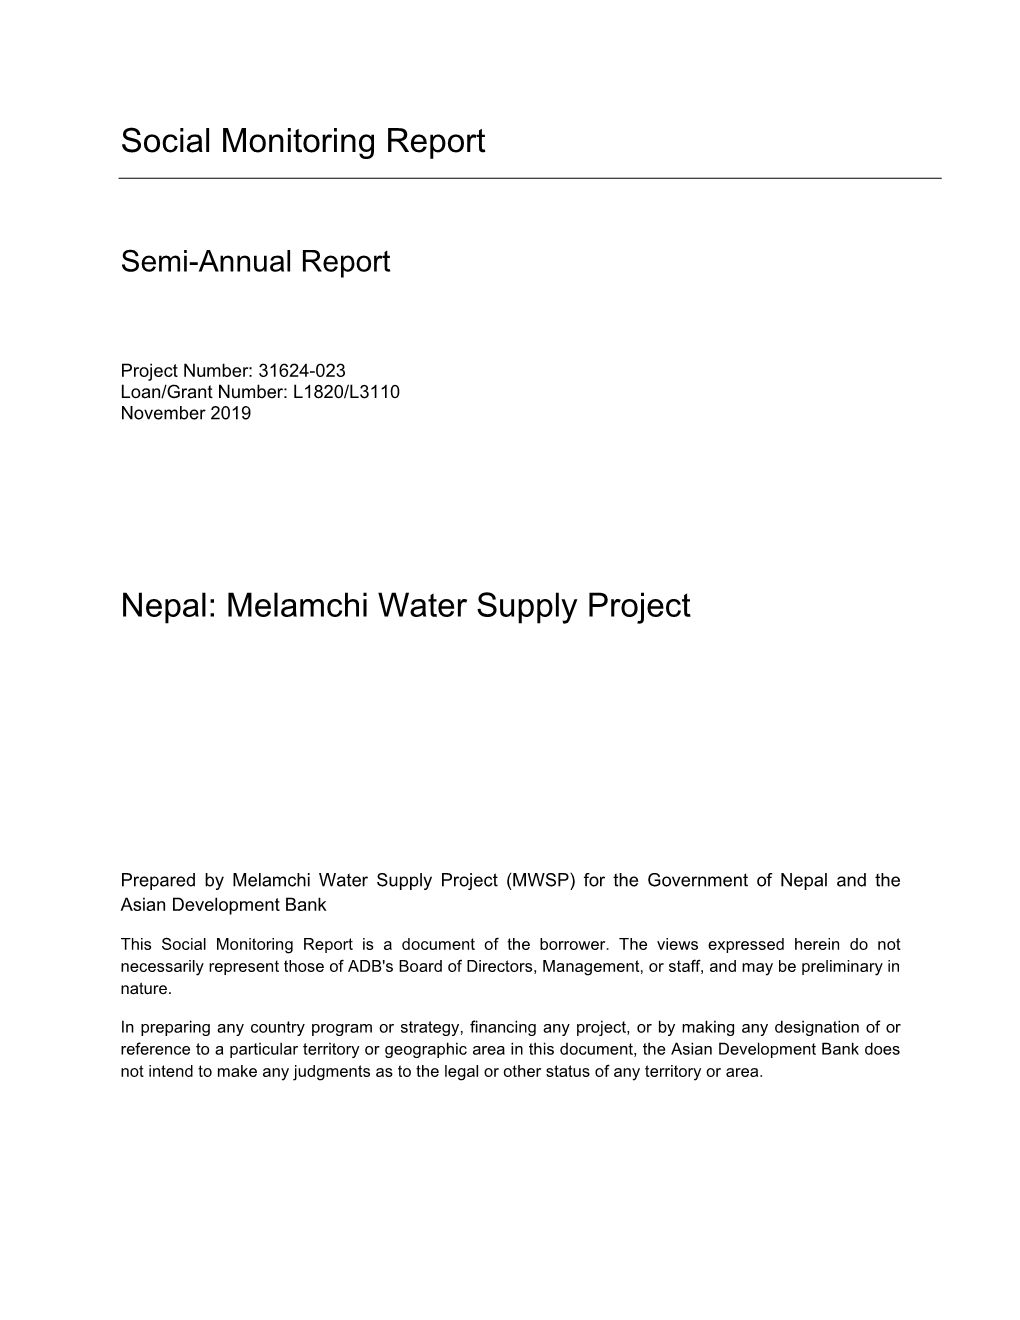 31624-023: Melamchi Water Supply Project